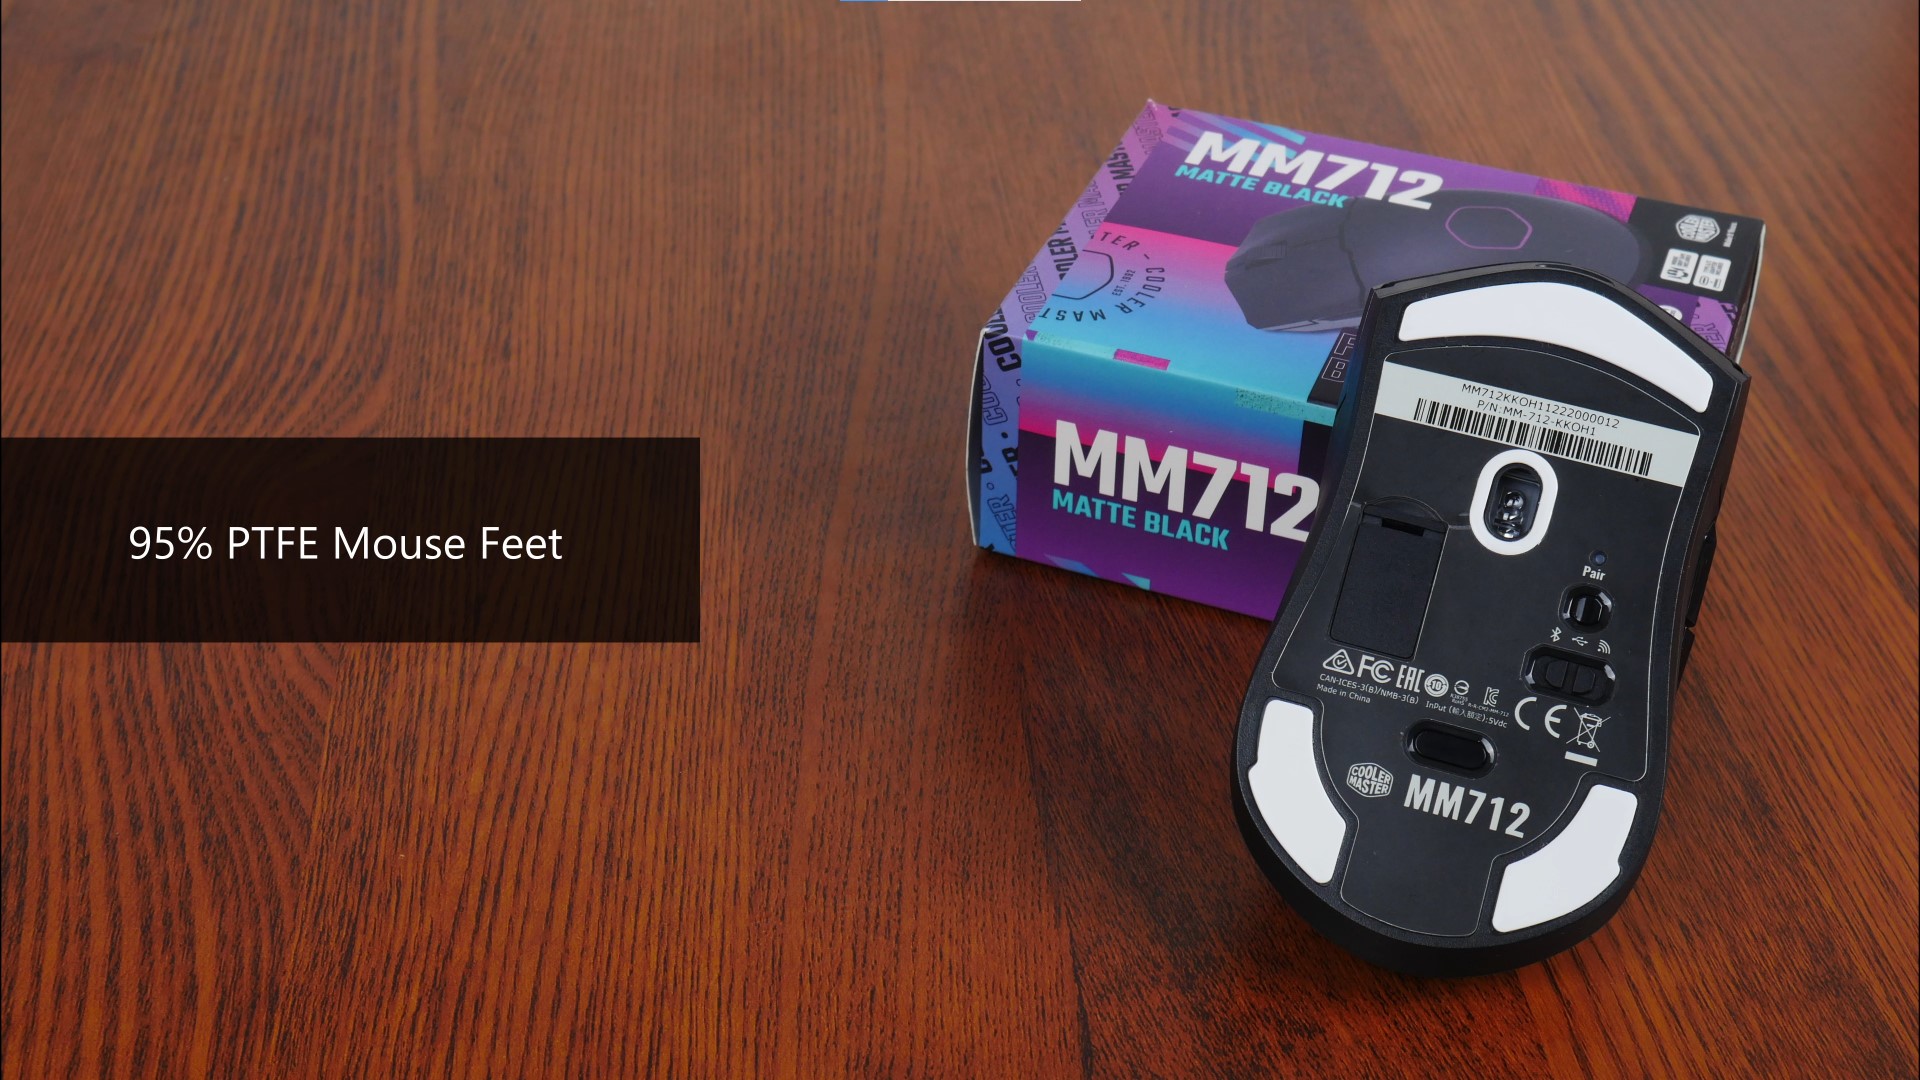 Cooler Master MM712 Mouse Feet